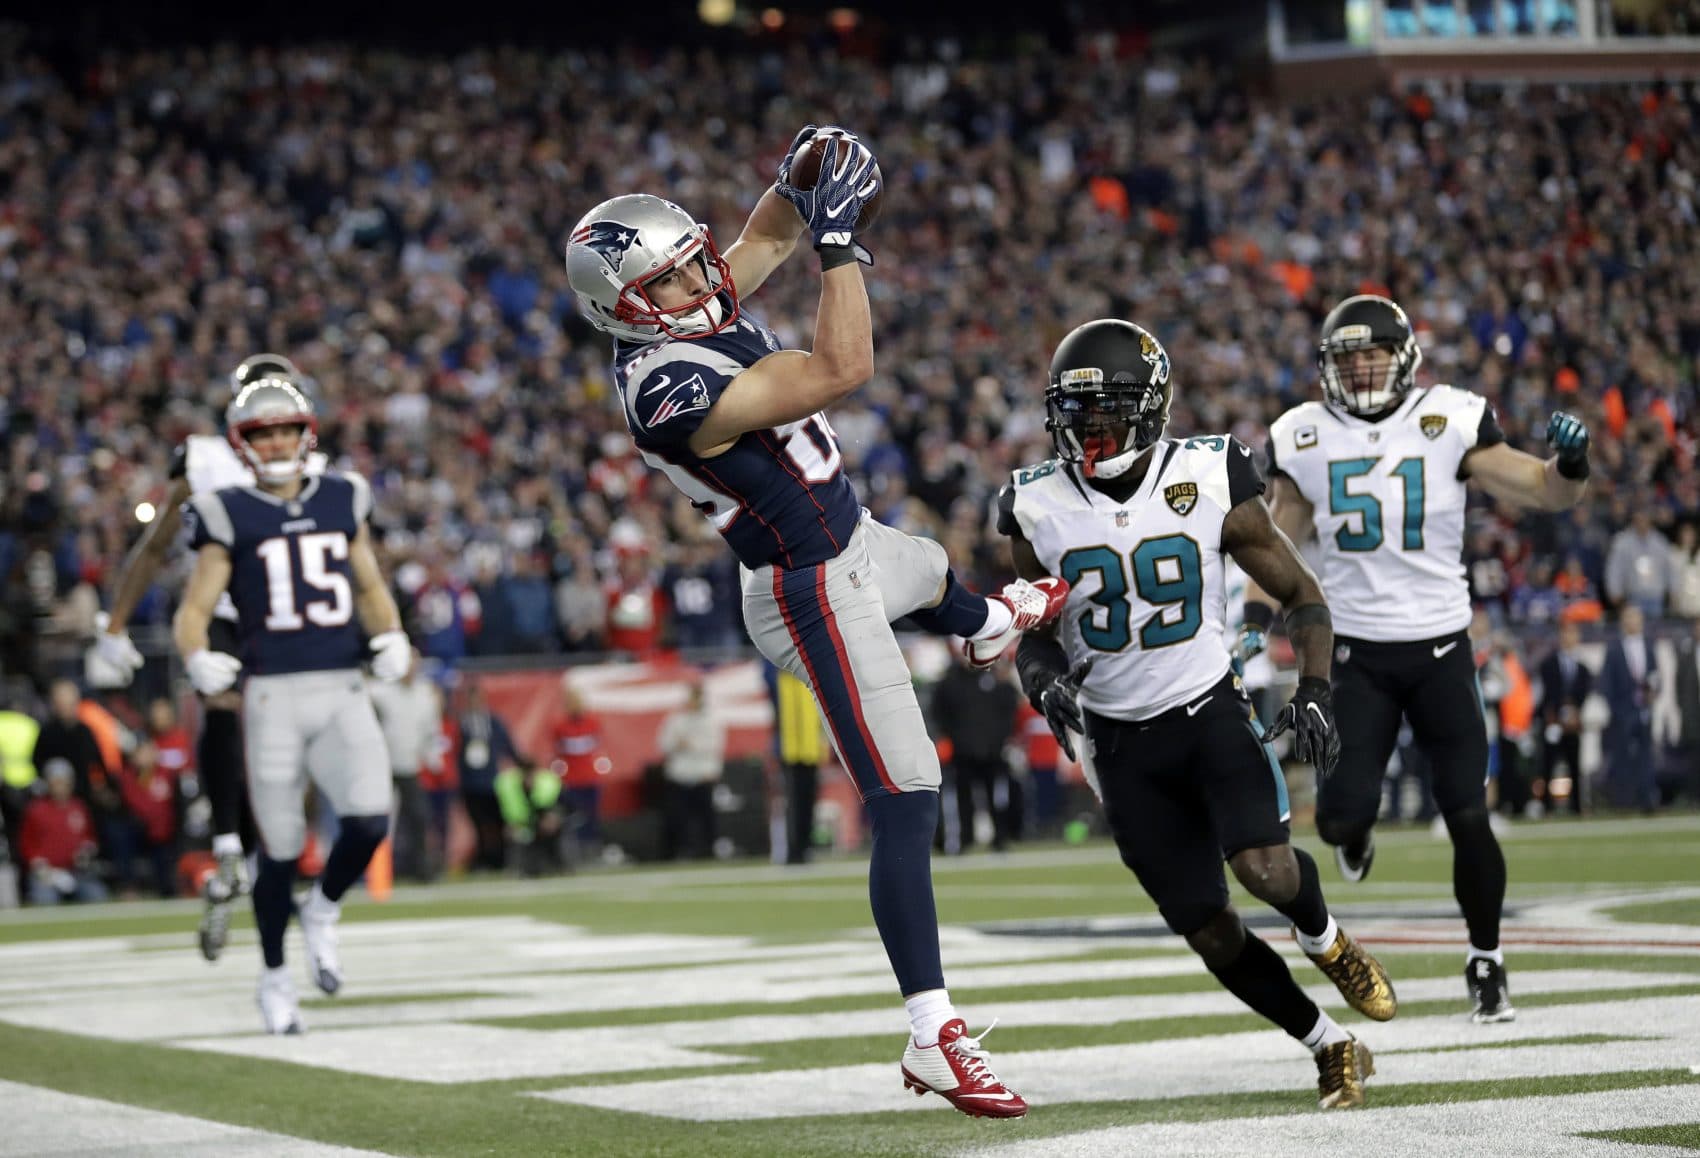 New England Patriots wide receiver Danny Amendola (80) catches a touchdown pass in front of Jacksonville Jaguars safety Tashaun Gipson (39) and linebacker Paul Posluszny (51) during the second half of the AFC championship NFL football game, Sunday, Jan. 21, 2018, in Foxborough, Mass. (AP Photo/David J. Phillip)